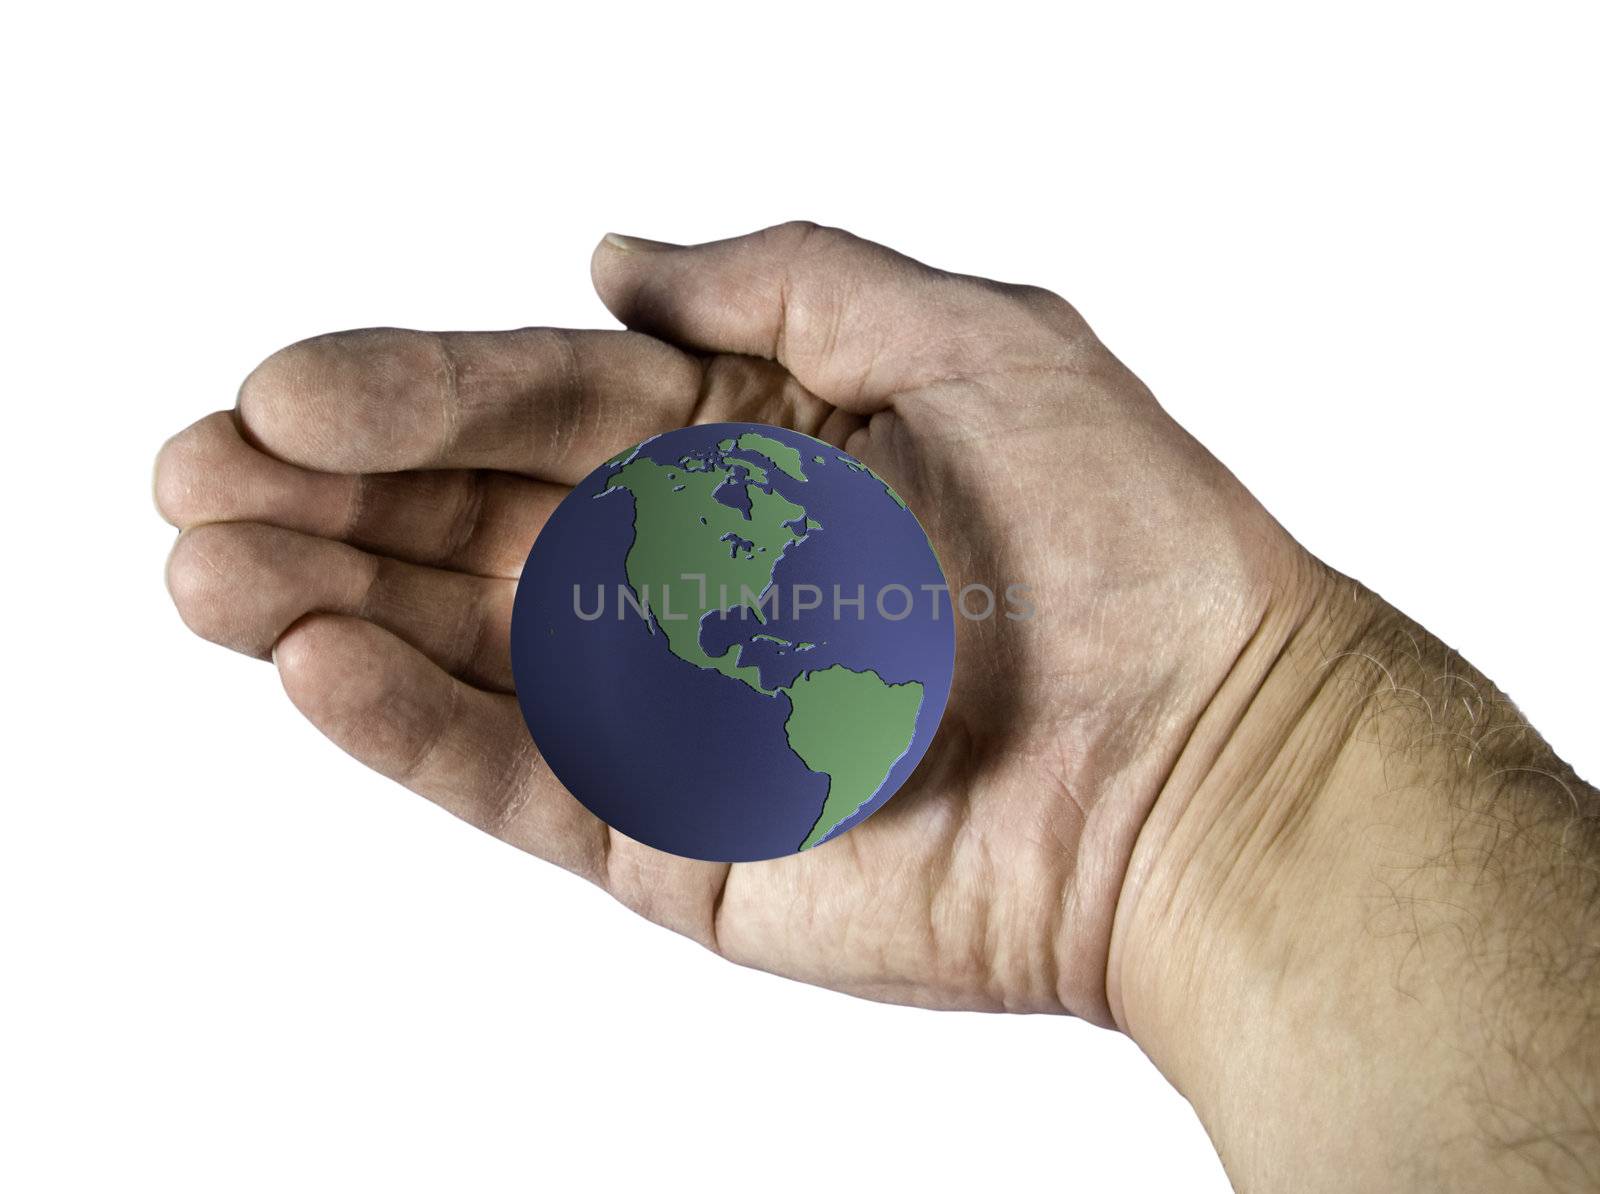 An image showing the earth cradled in an old hand